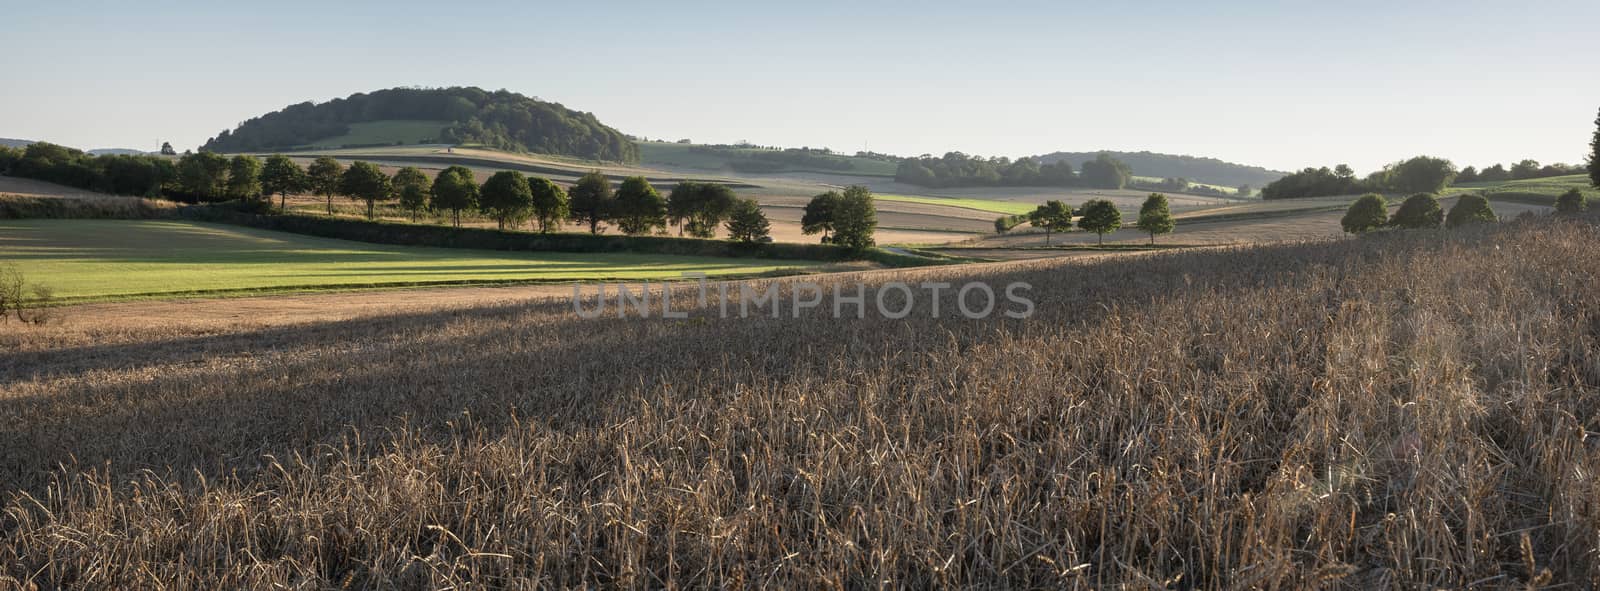 landscape with cornfields and meadows in regional parc de caps et marais d'opale in the north of france by ahavelaar